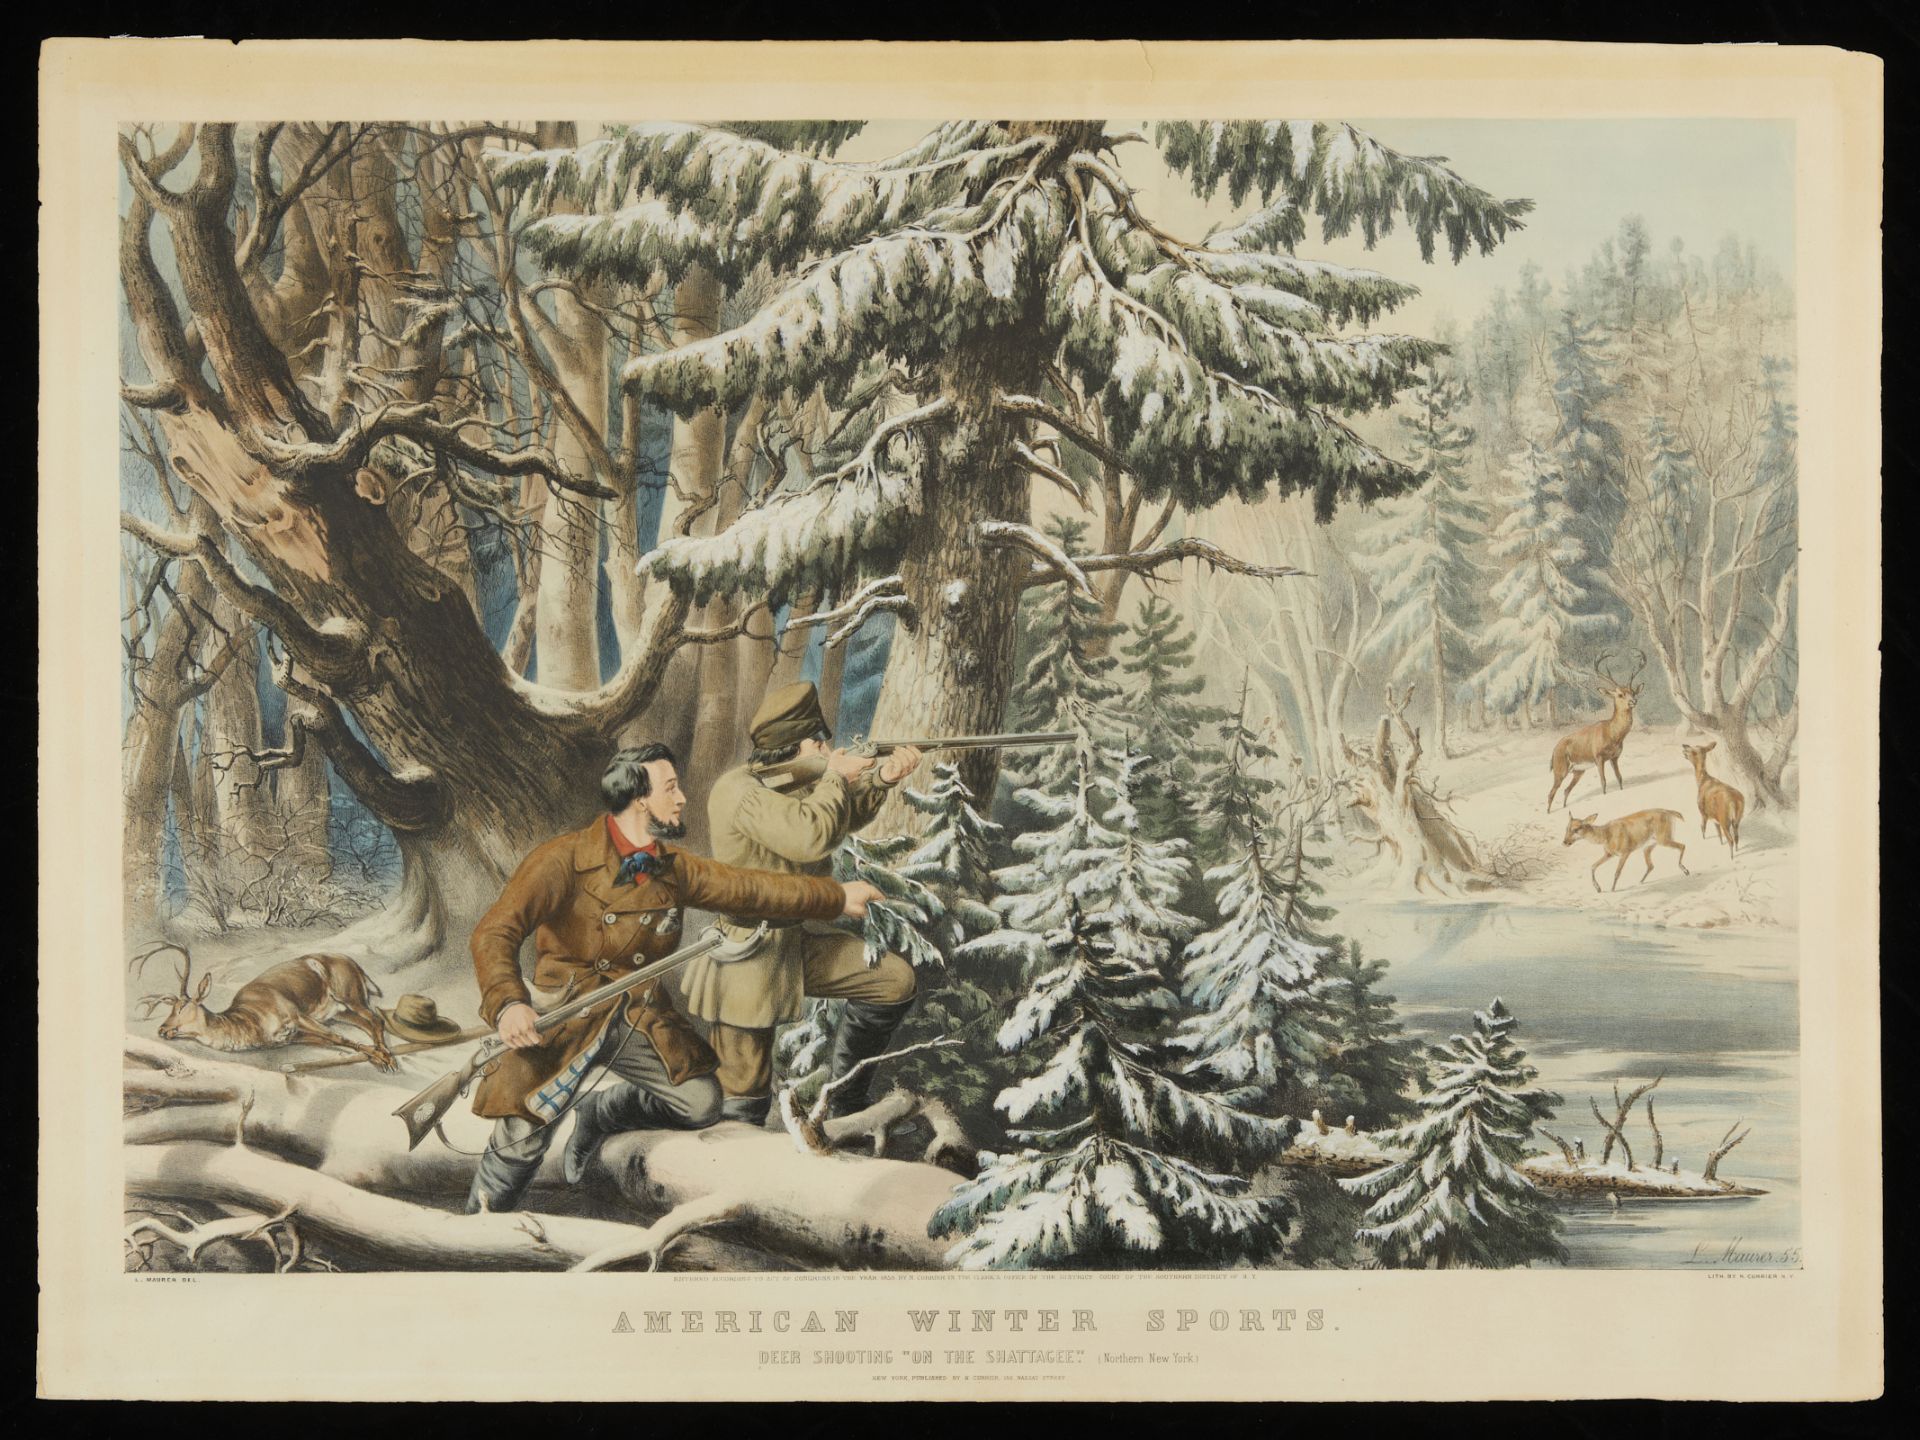 Currier & Ives "Am. Winter Sports: Deer Shooting" - Image 3 of 8